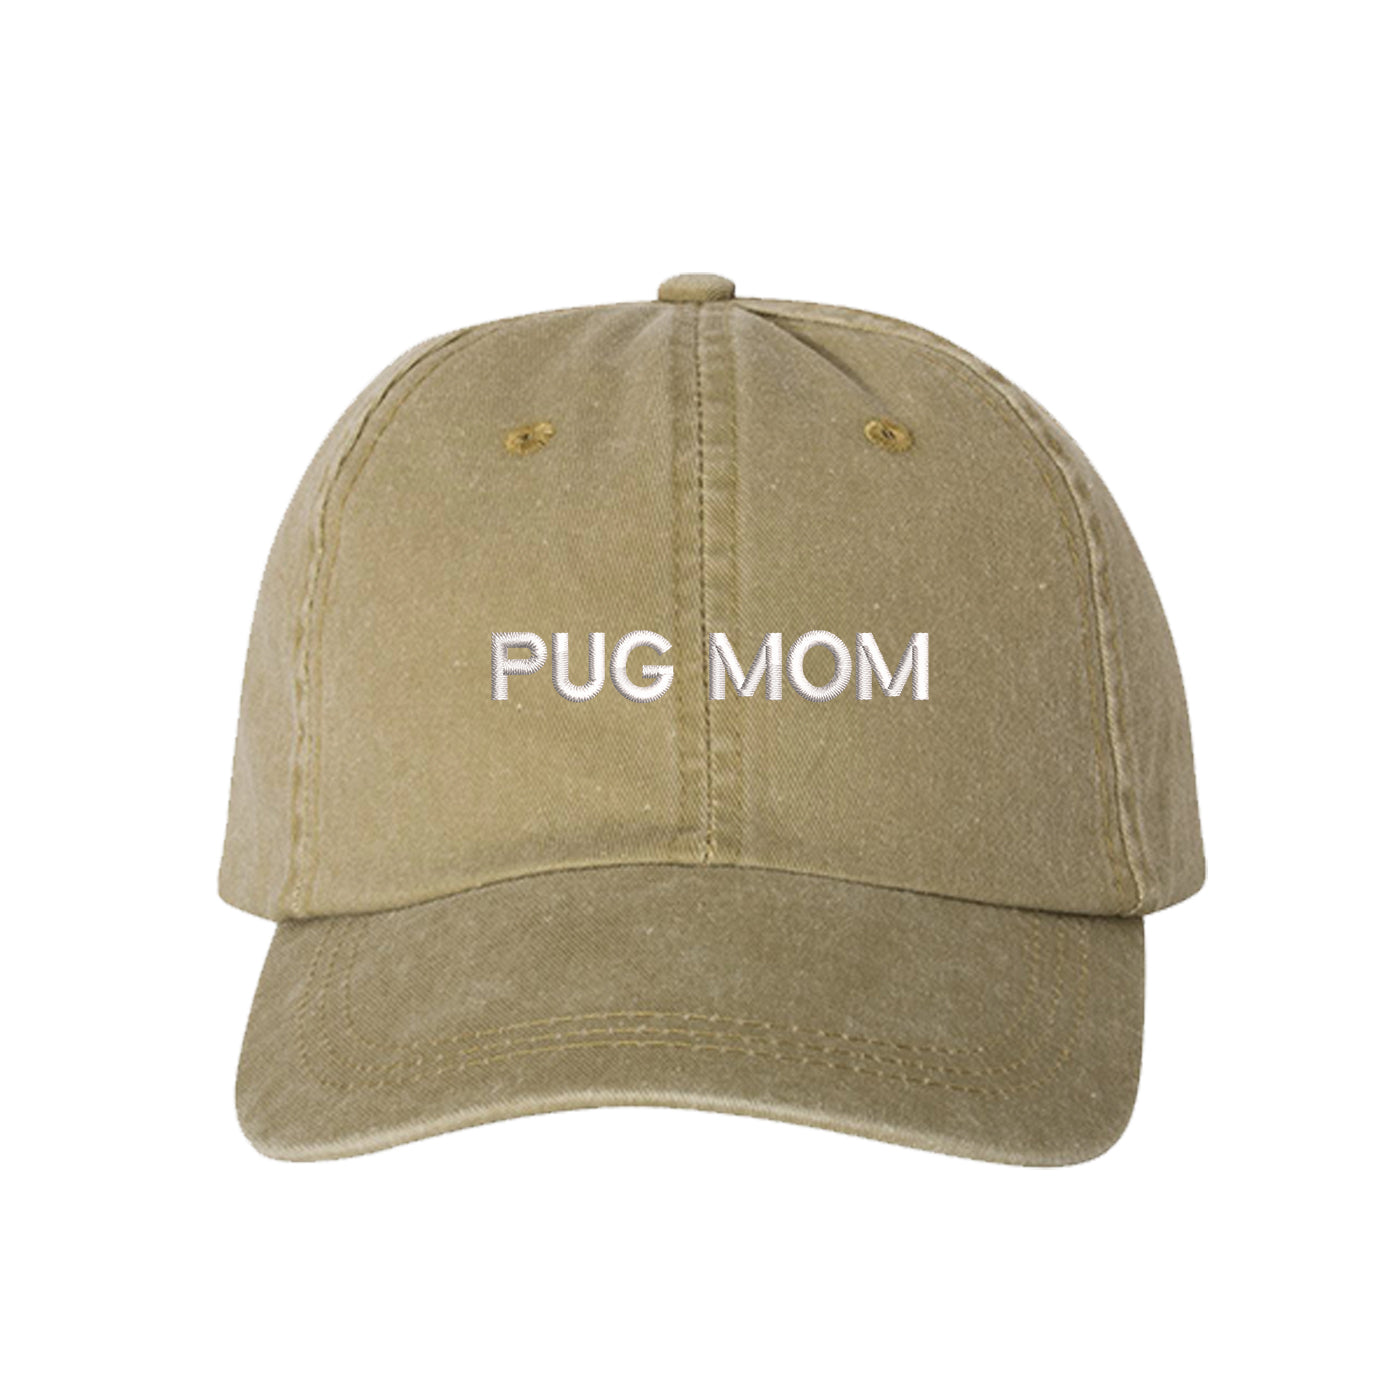 Pug Mom Washed Baseball Hat, Pug Mom Dad Hat, Dog Parent Hats, Embroidered Dad hat, Animal Lover Gifts, Pug Mother, Mothers Day Gift, Pug Mama, DSY Lifestyle Dad Hats, Khaki Washed Baseball Hat